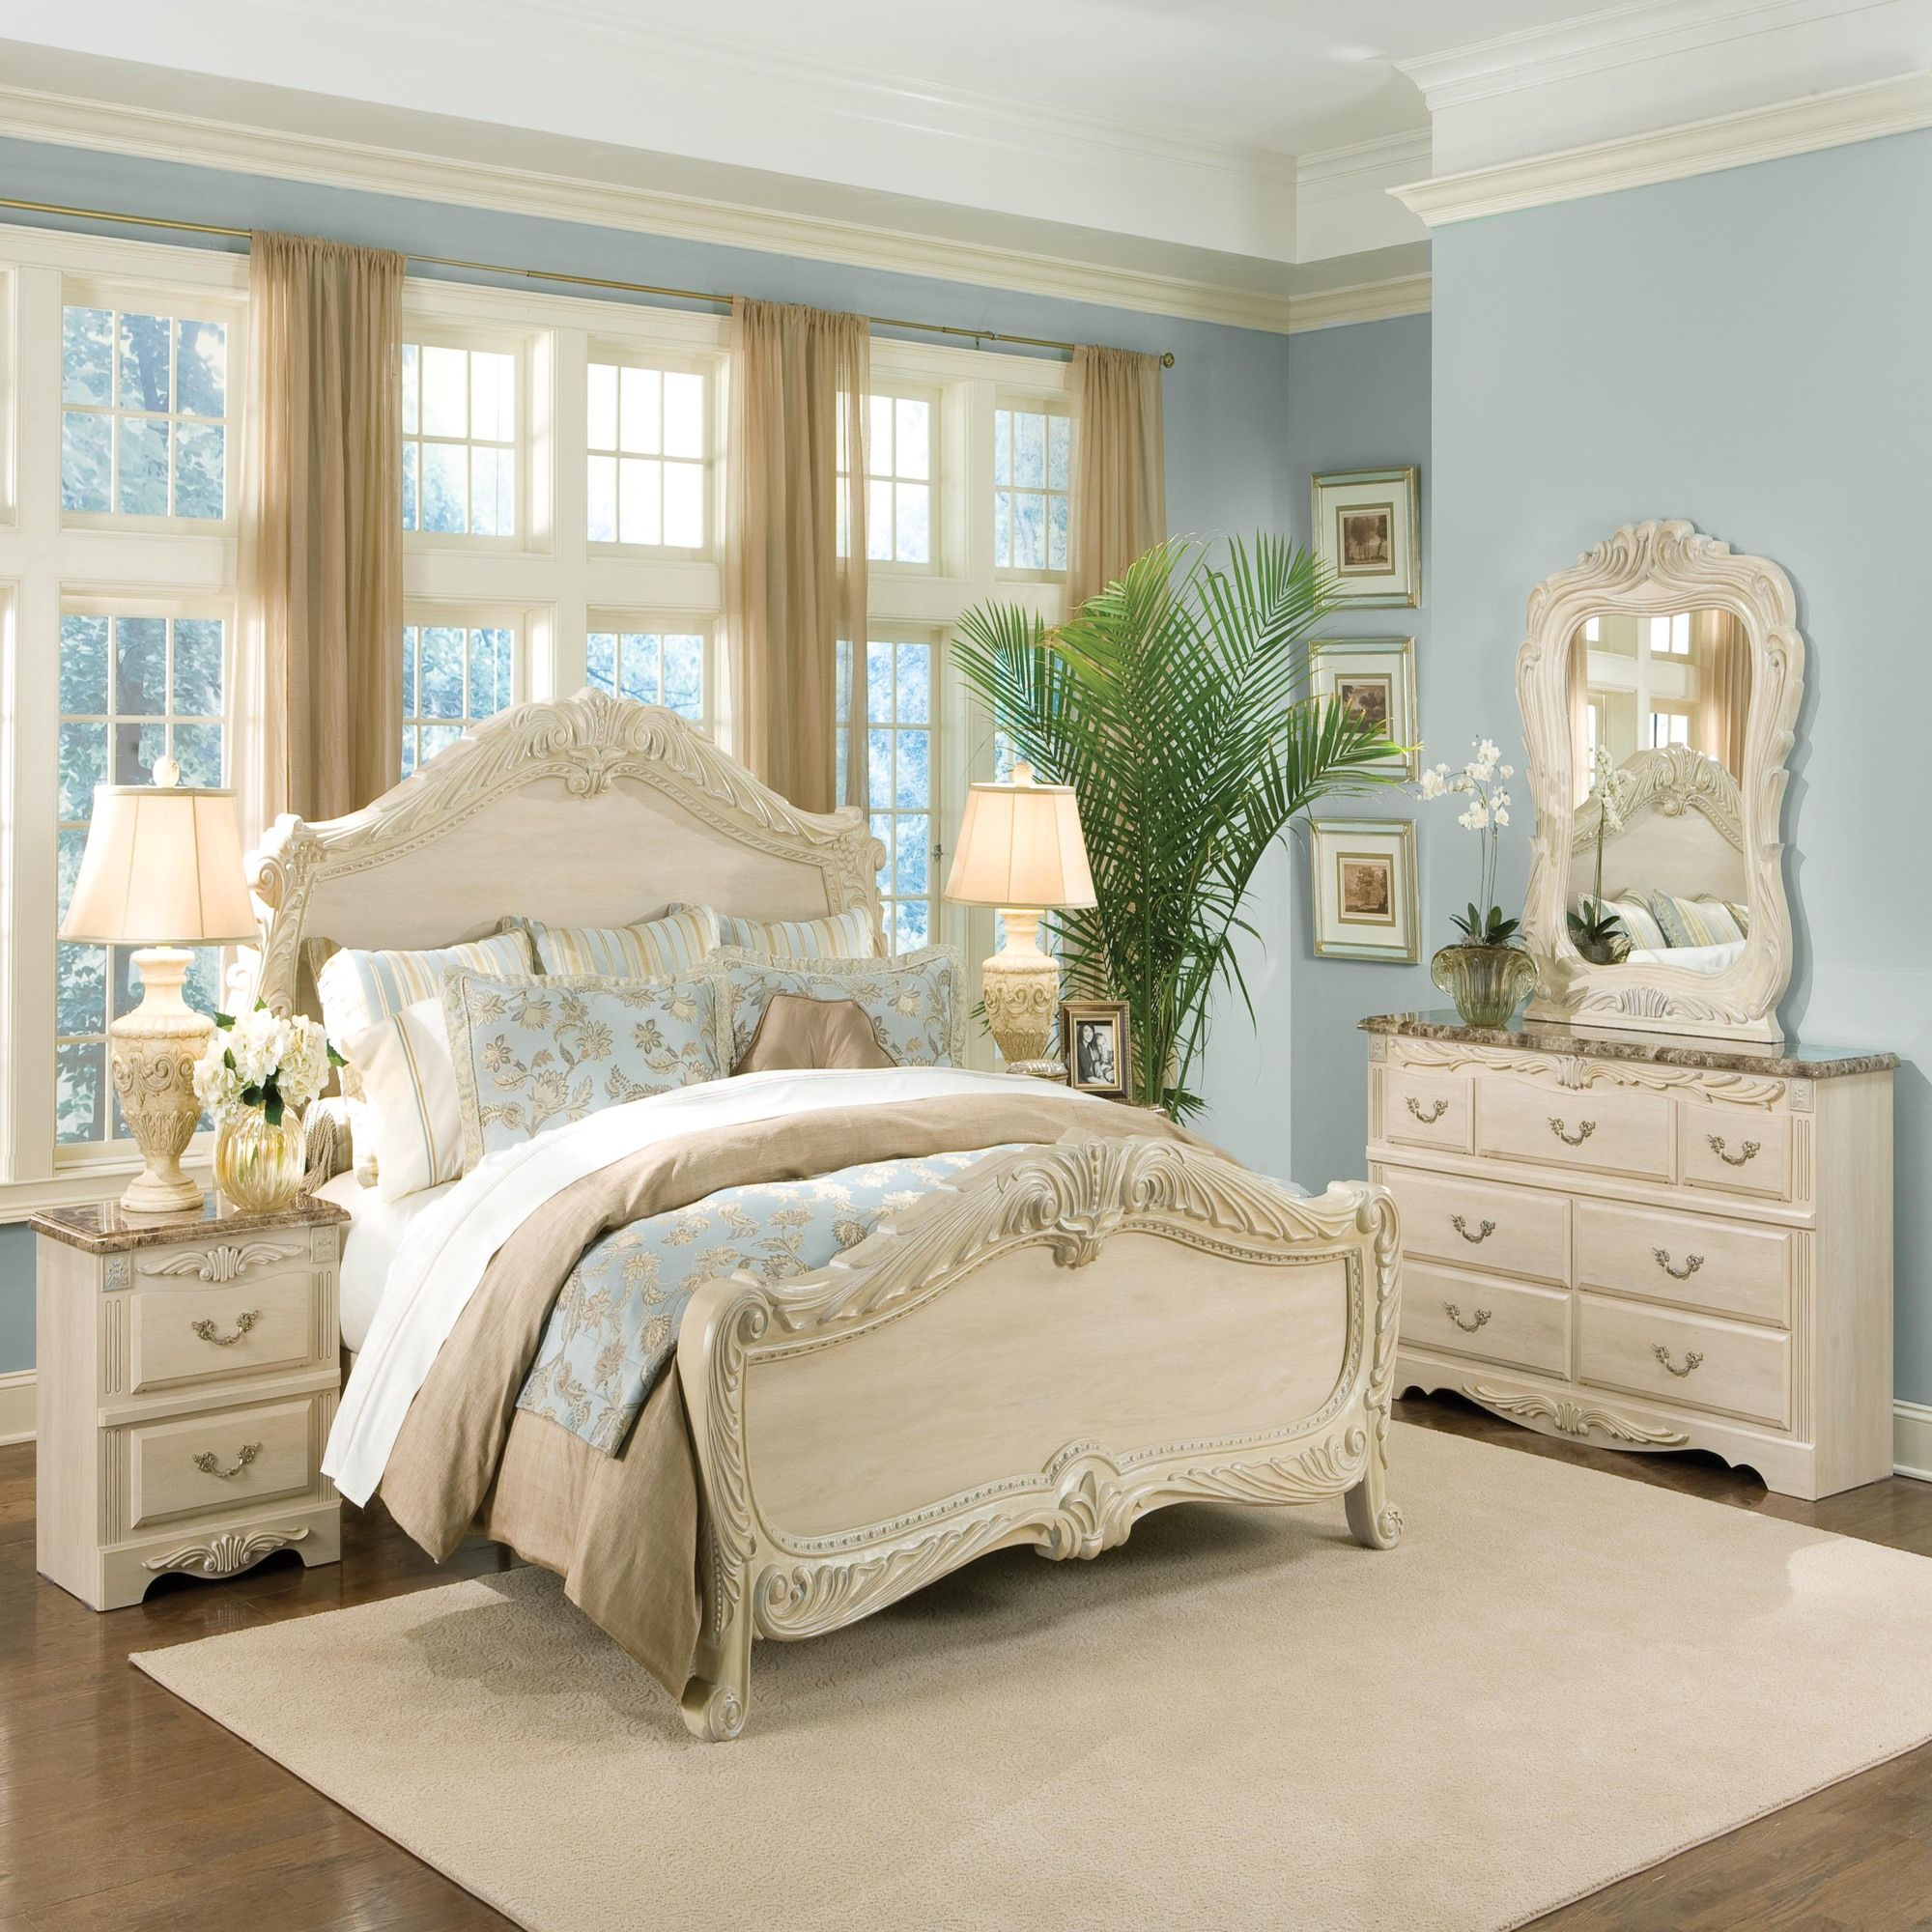 The Neutral Colors In This Bedroom Make For A Peaceful Nights Sleep regarding size 2000 X 2000